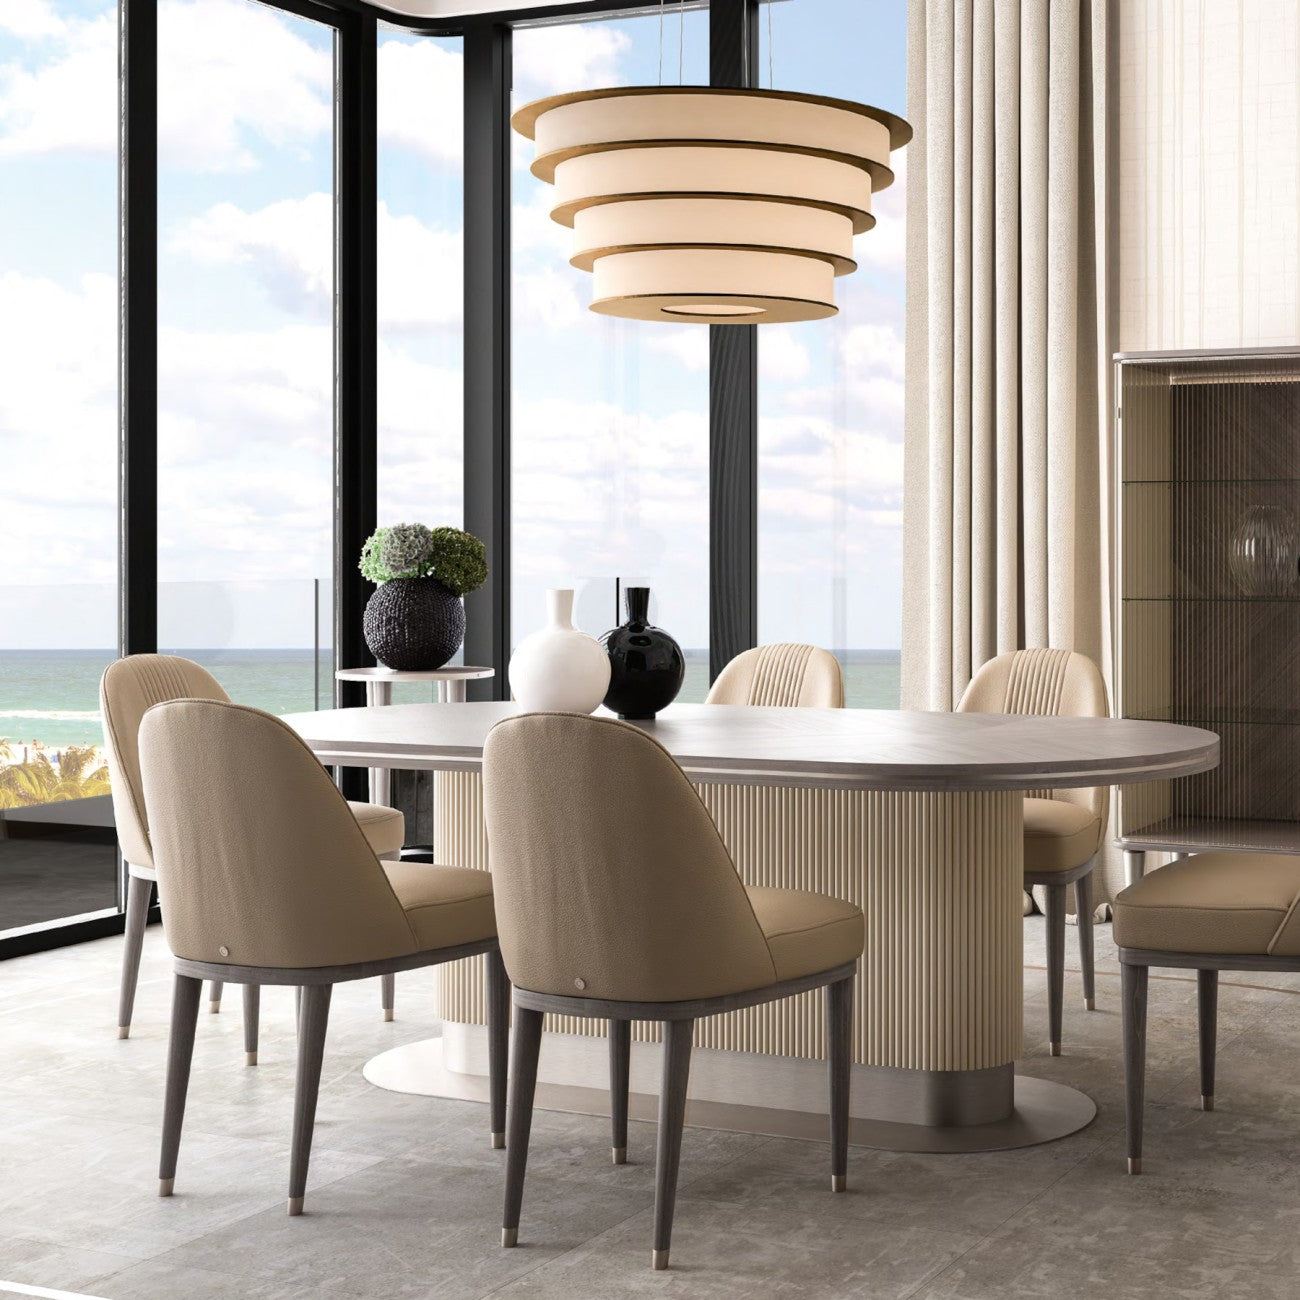 CPRN HOMOOD | Cocoon Oval Dining Table - $19,990.00